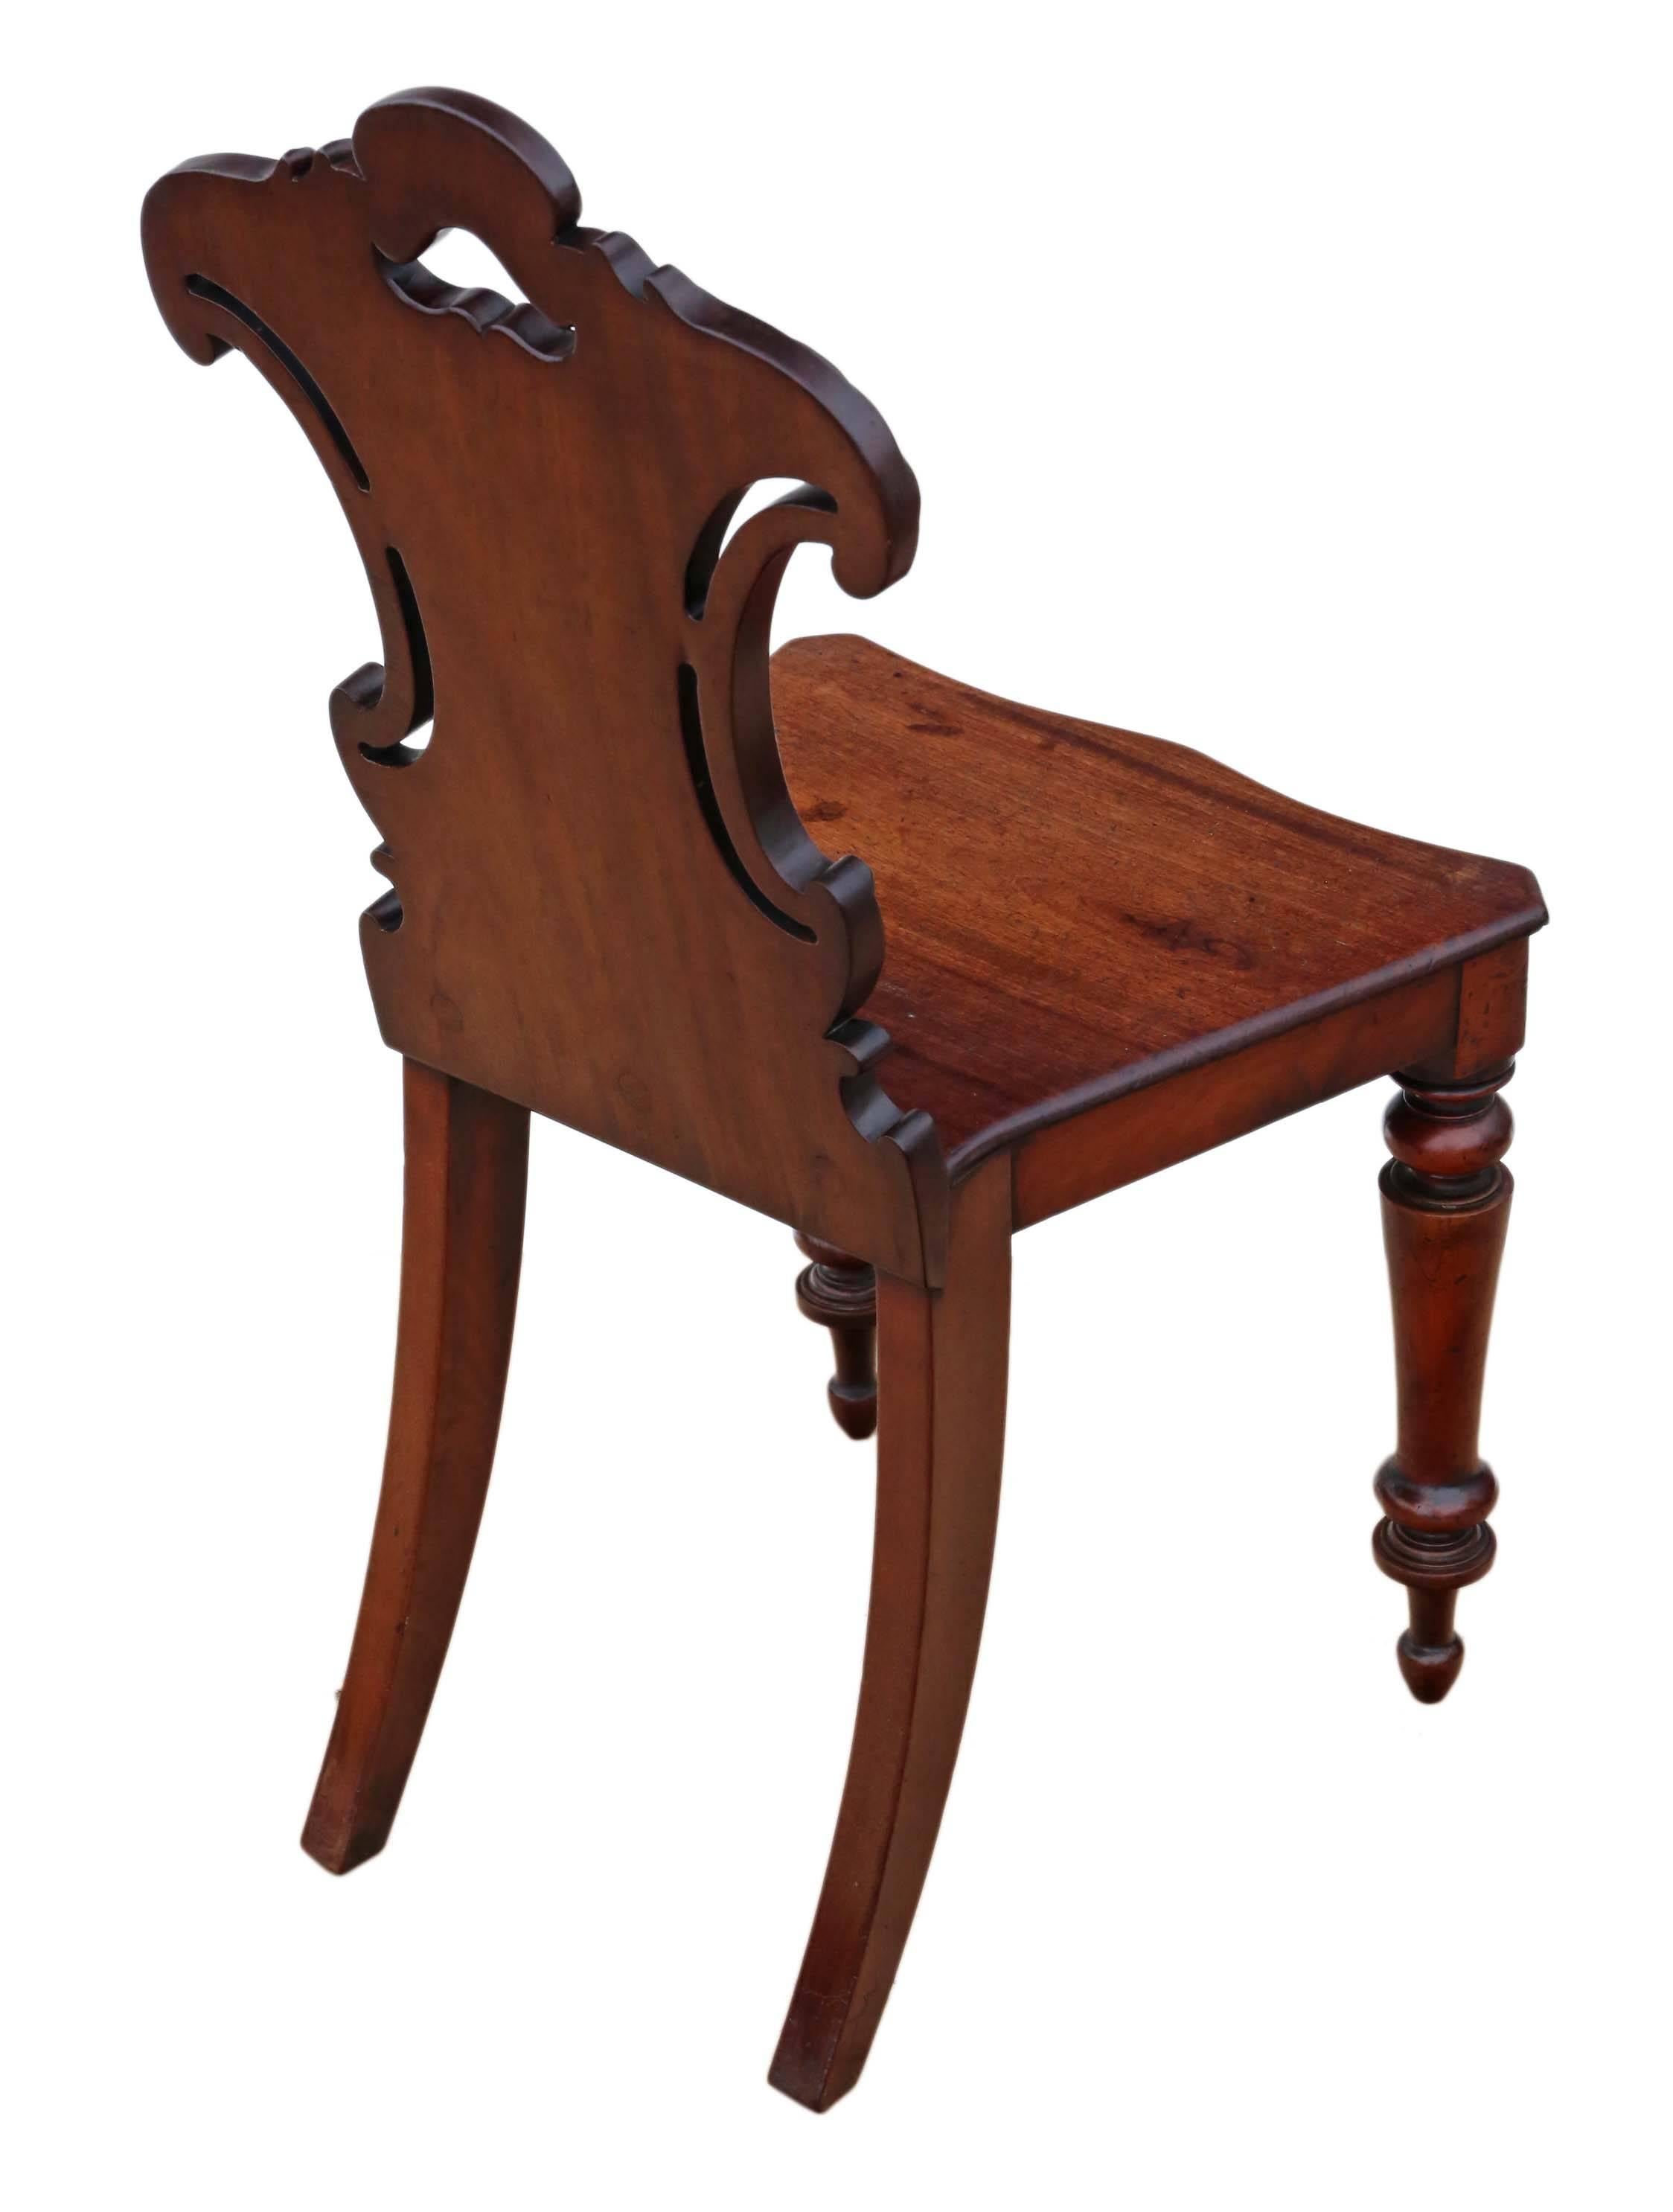 Antique Victorian circa 1850-1870 Carved Mahogany Hall Chair In Excellent Condition For Sale In Wisbech, Walton Wisbech